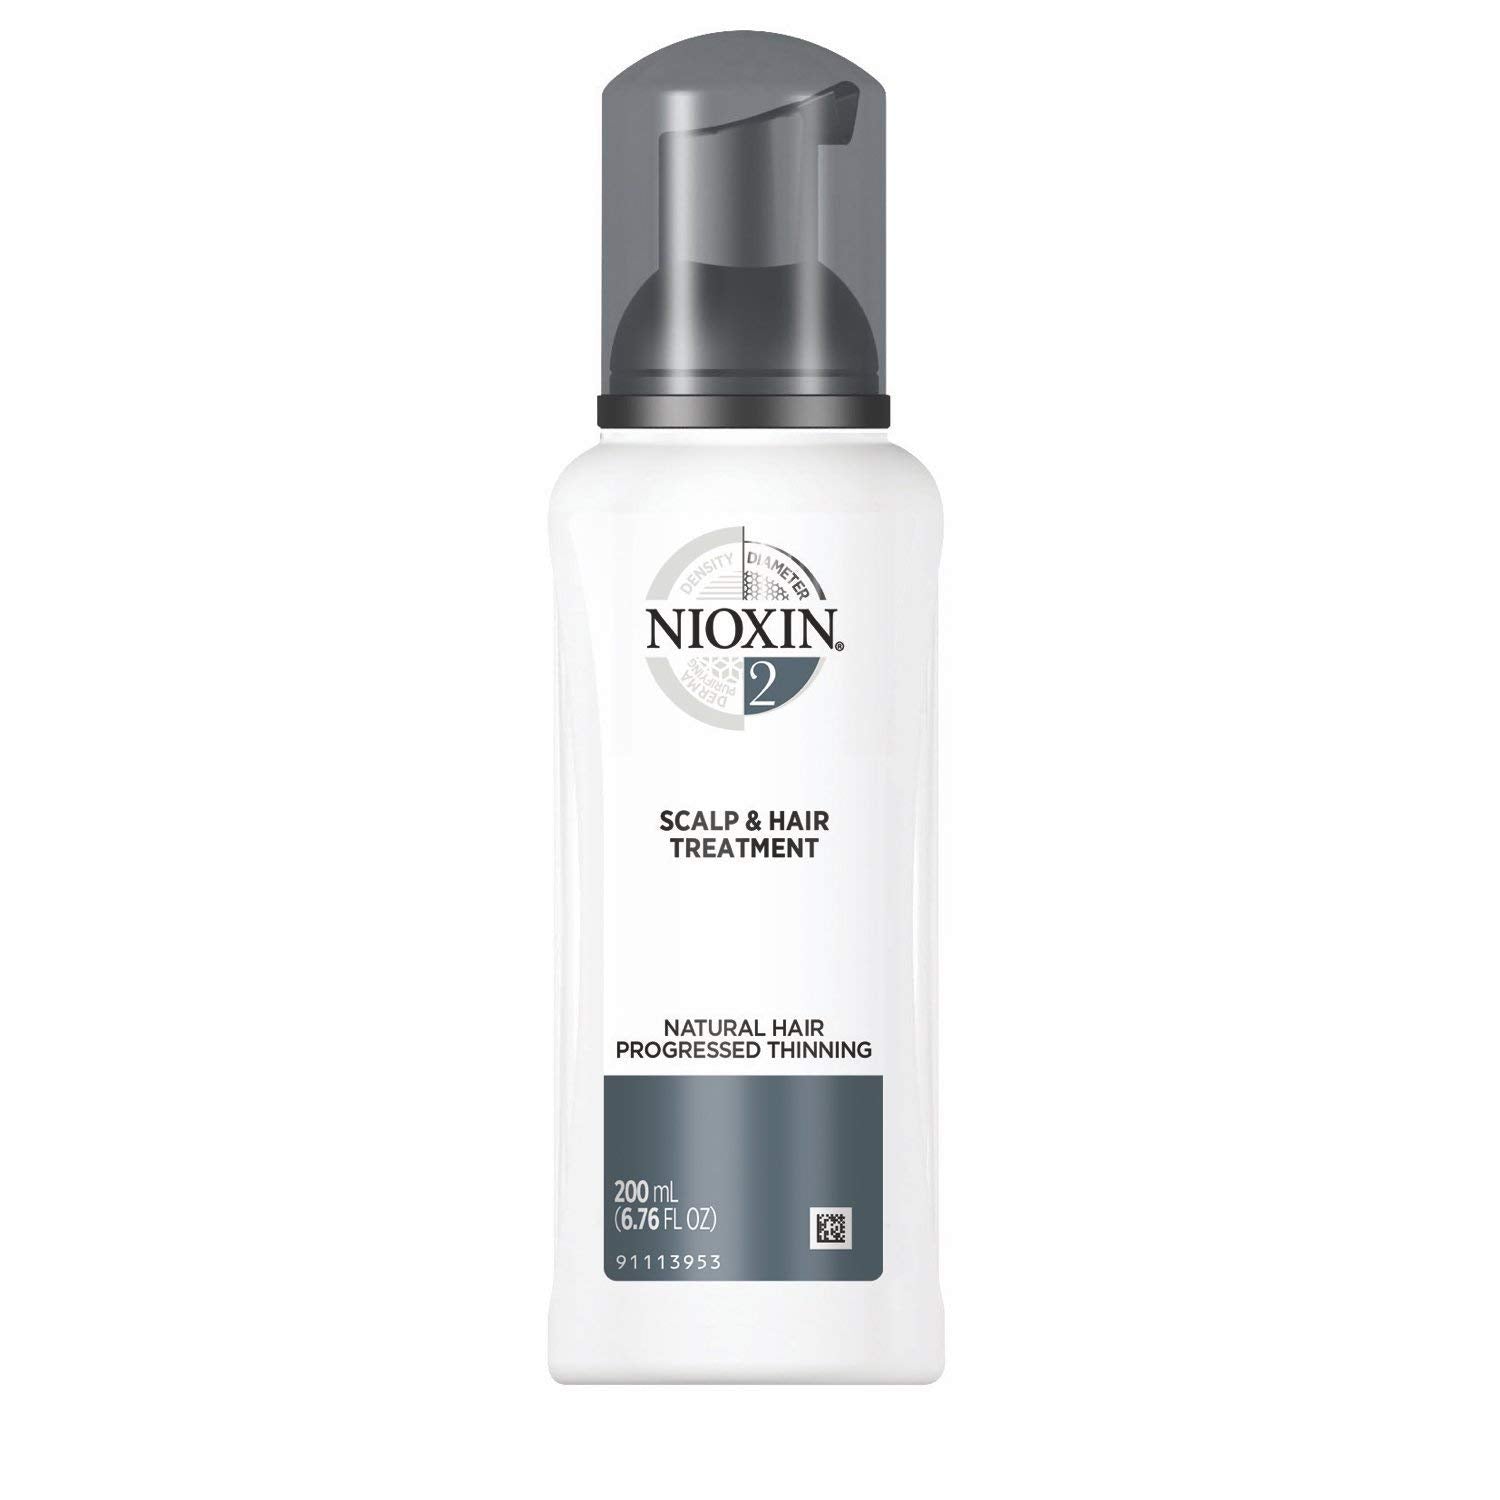 Nioxin 2 Scalp & Hair Leave-In Treatment System Step 3 200mL.